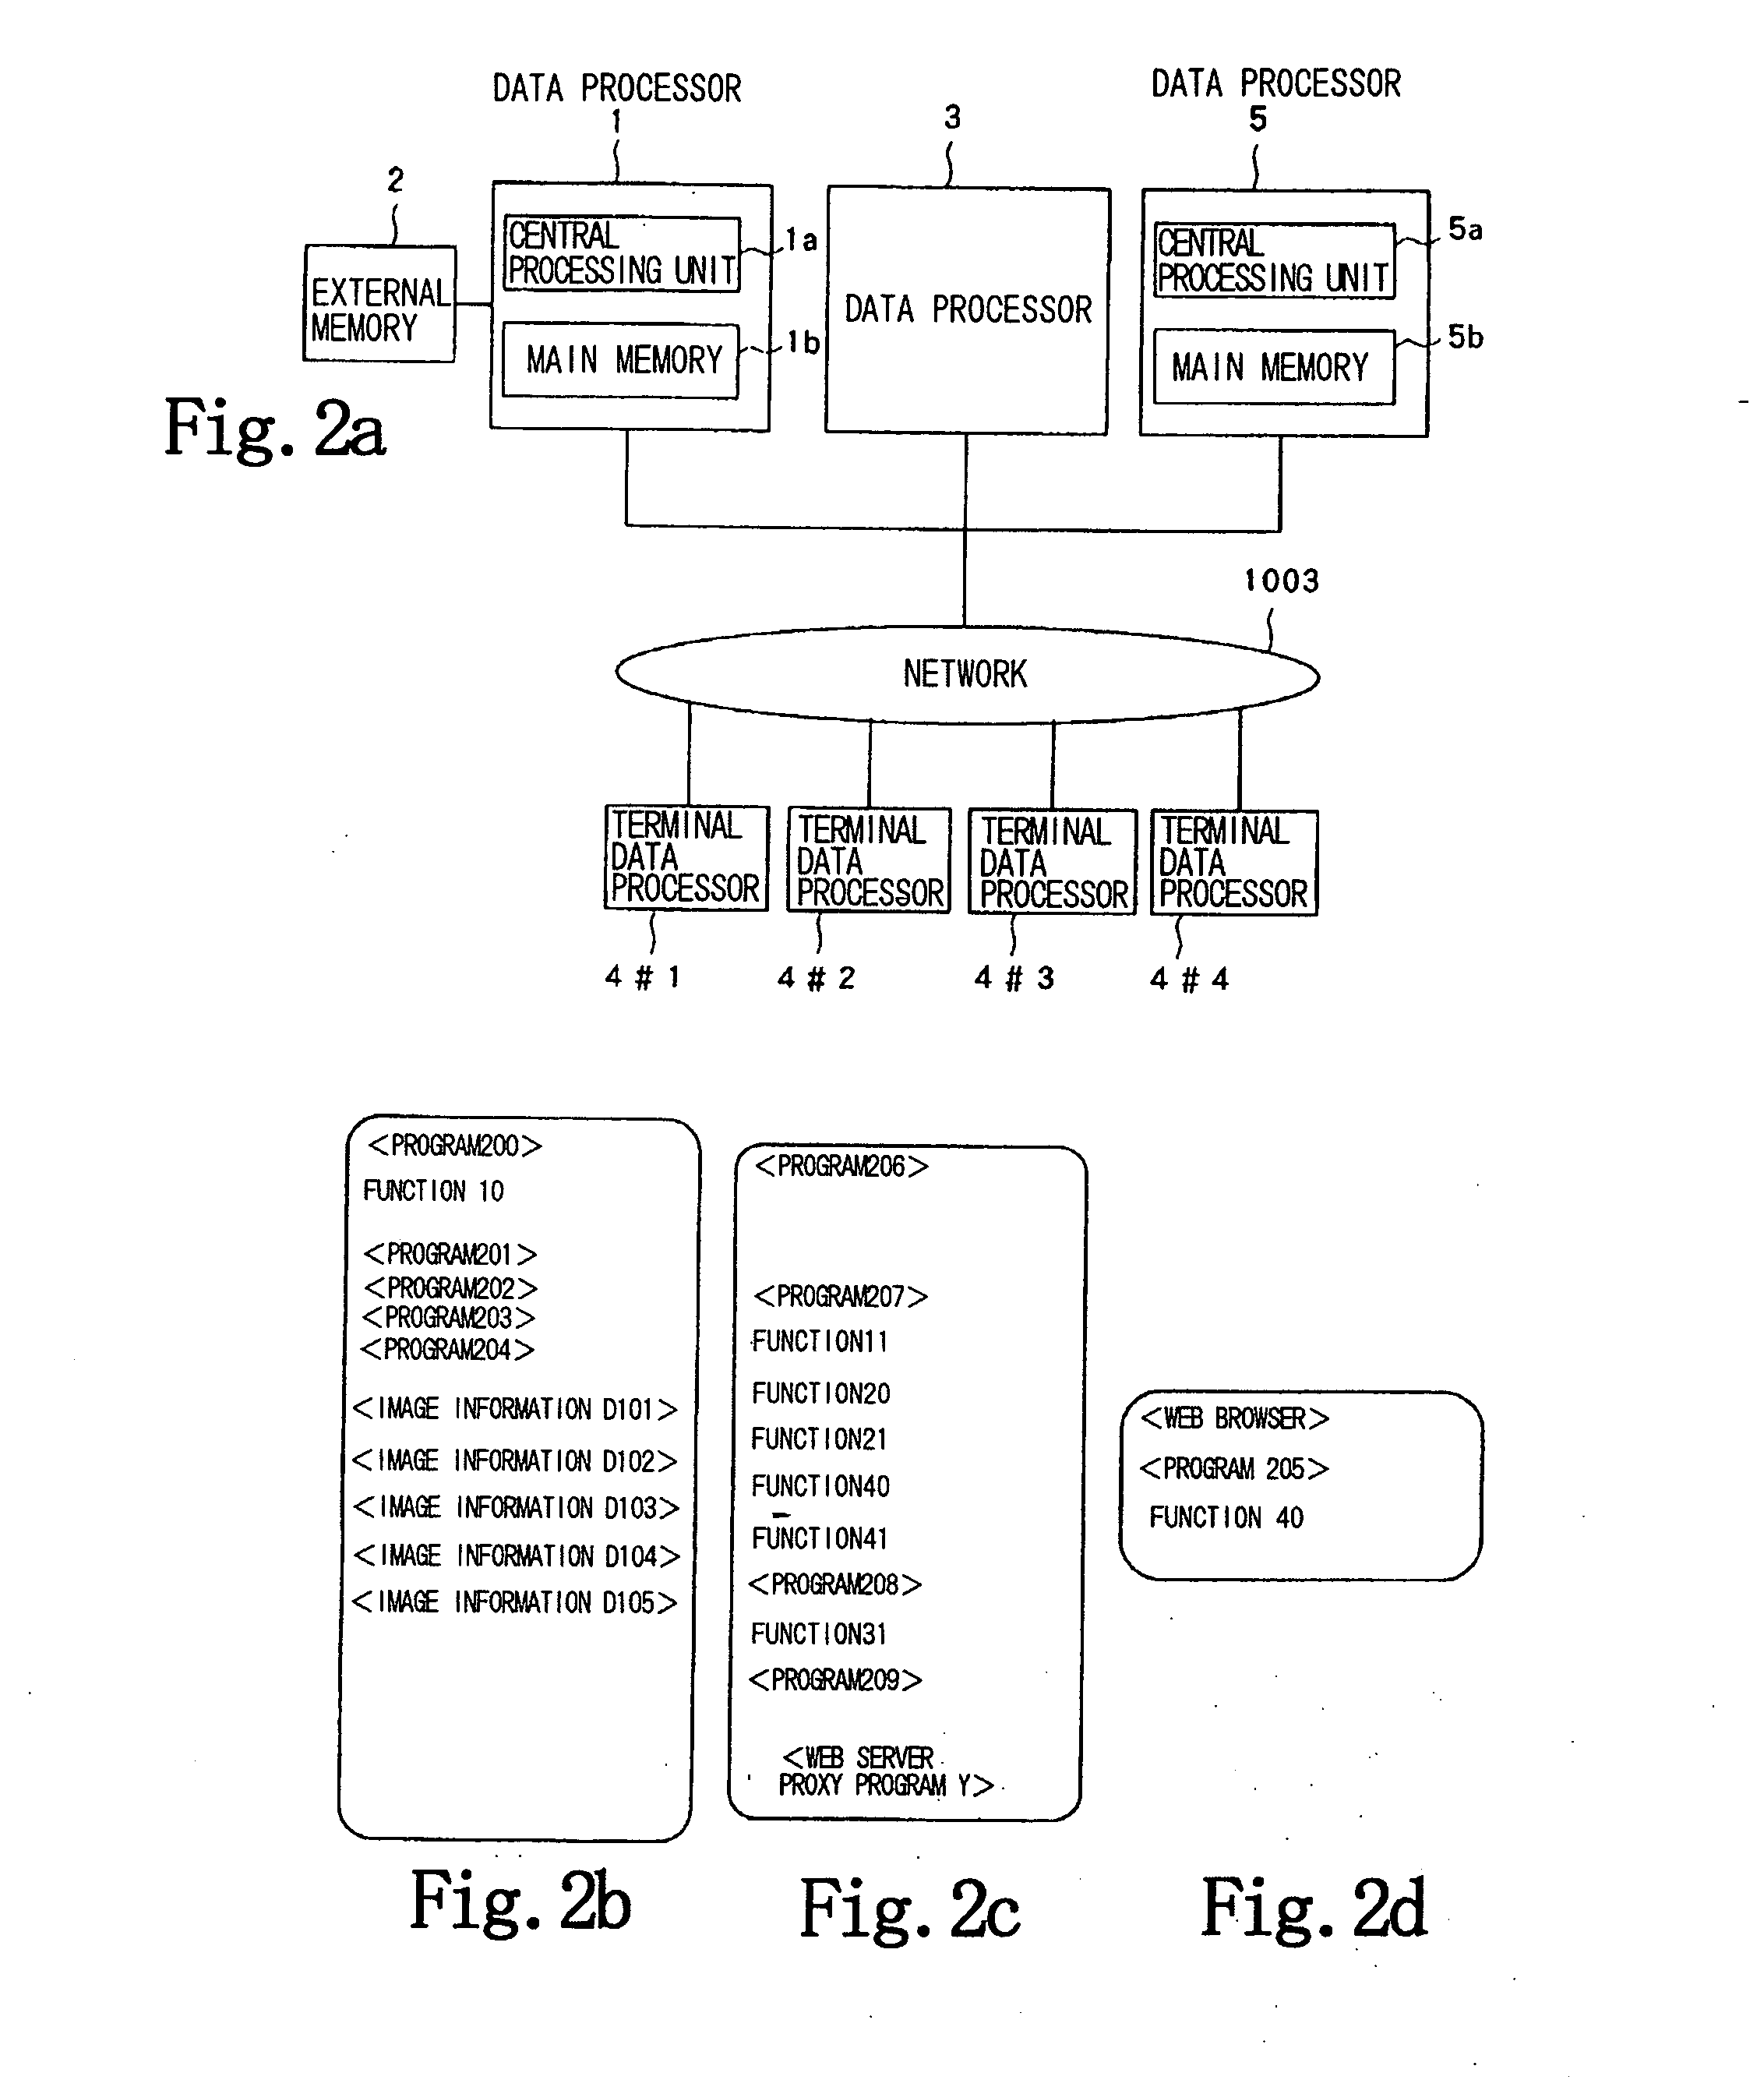 Image array authentication system